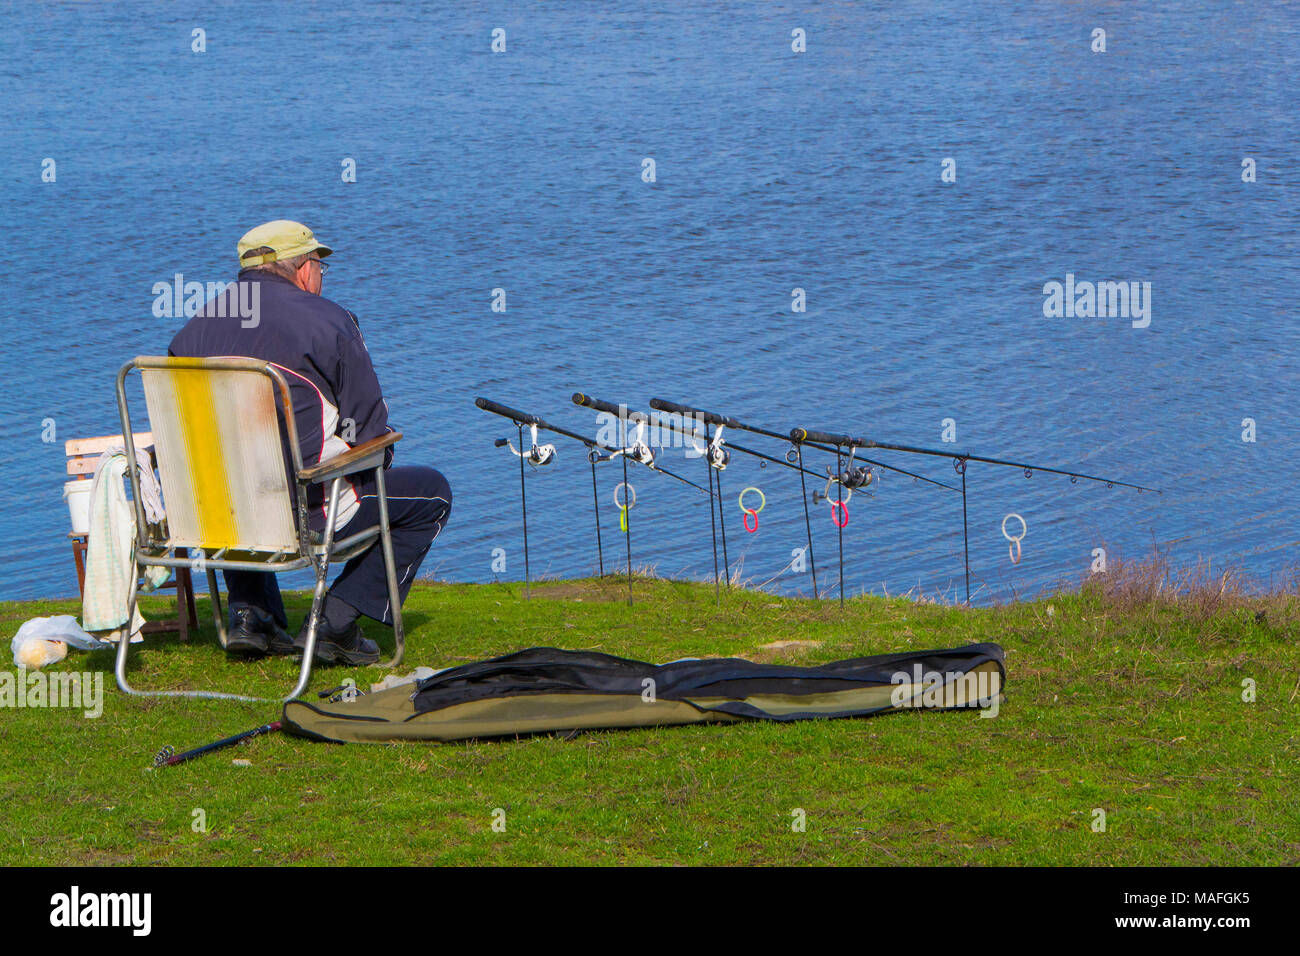 Fisherman with rods. Waiting fish to bite hook Stock Photo - Alamy